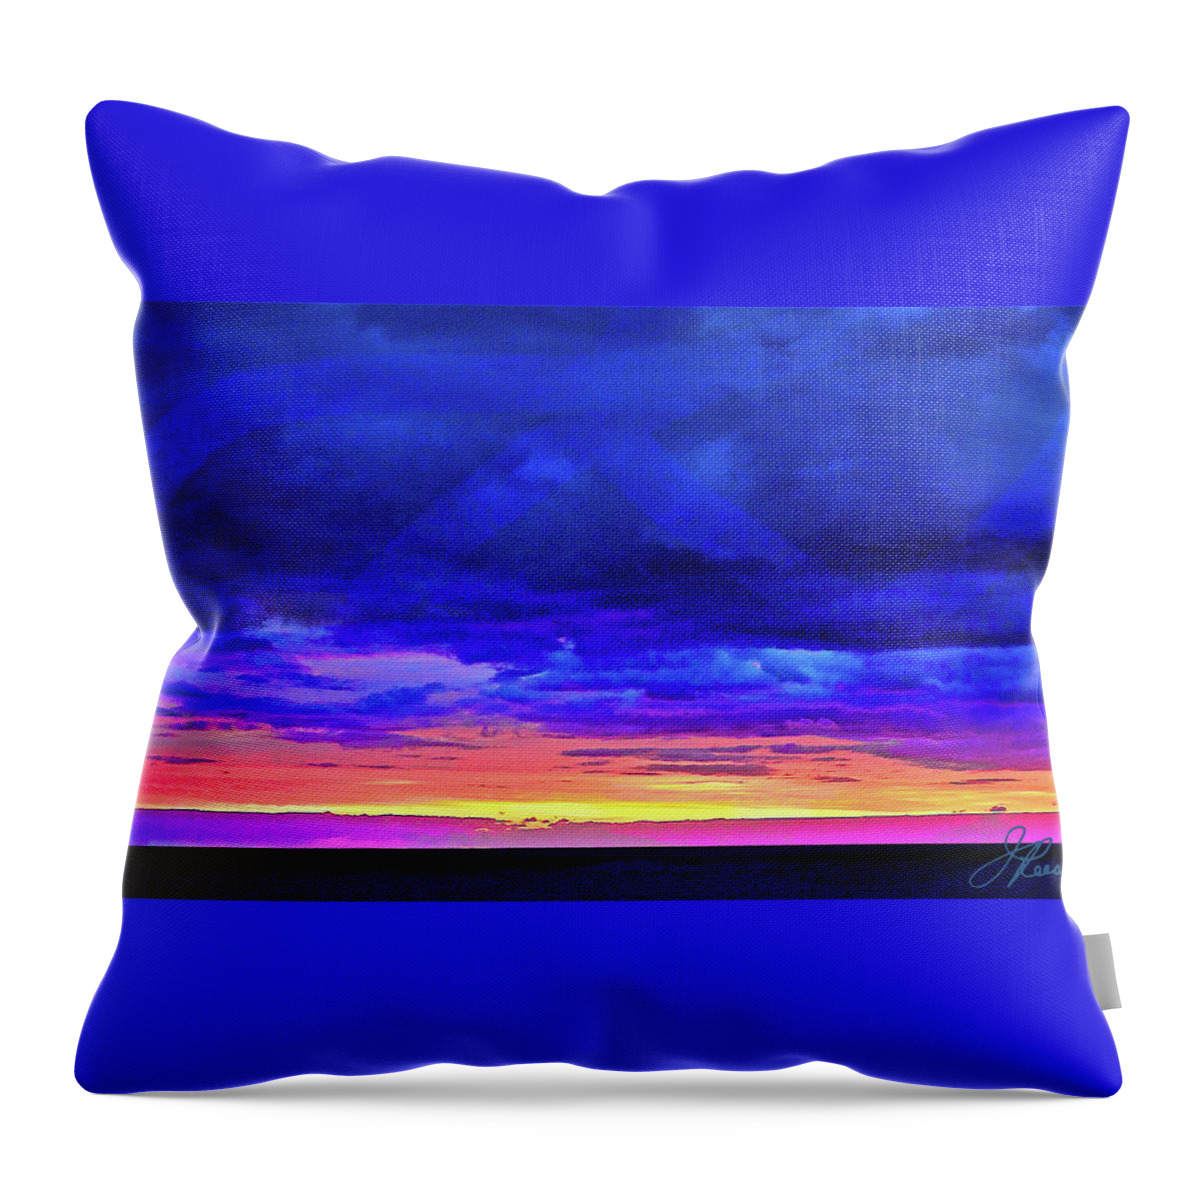 Horizon Sunrise Painting Signed By Artist Throw Pillow featuring the painting California Sunrise by Joan Reese